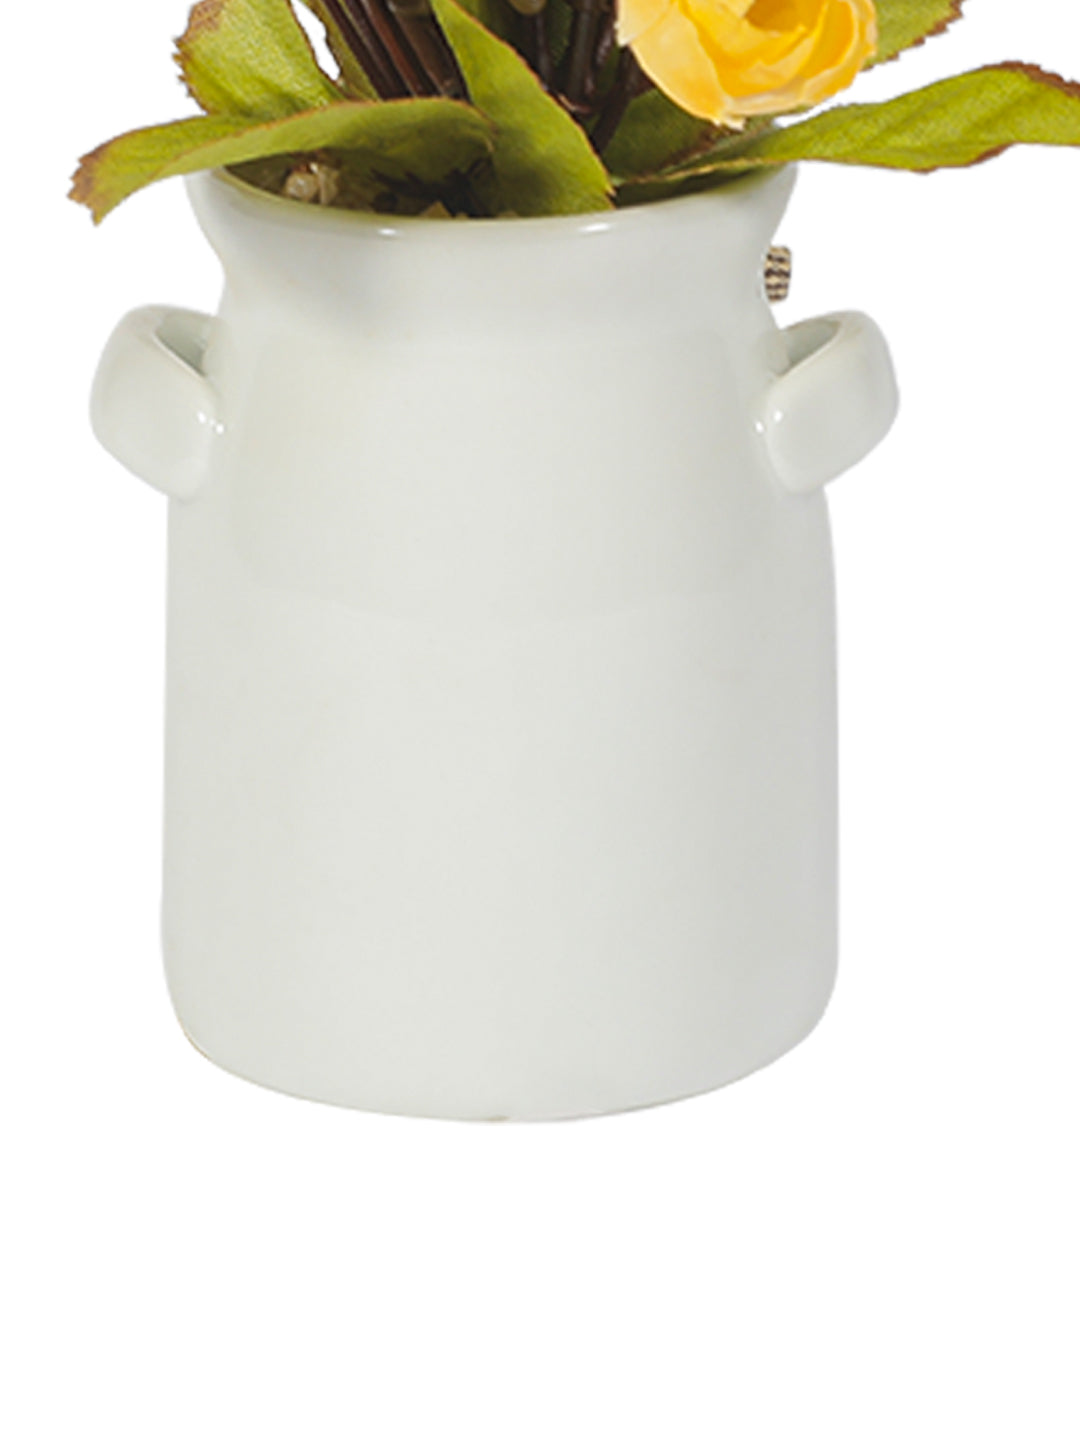 VON CASA Cylindrical Plastic Flower With Pot - Yellow Rose White Pot